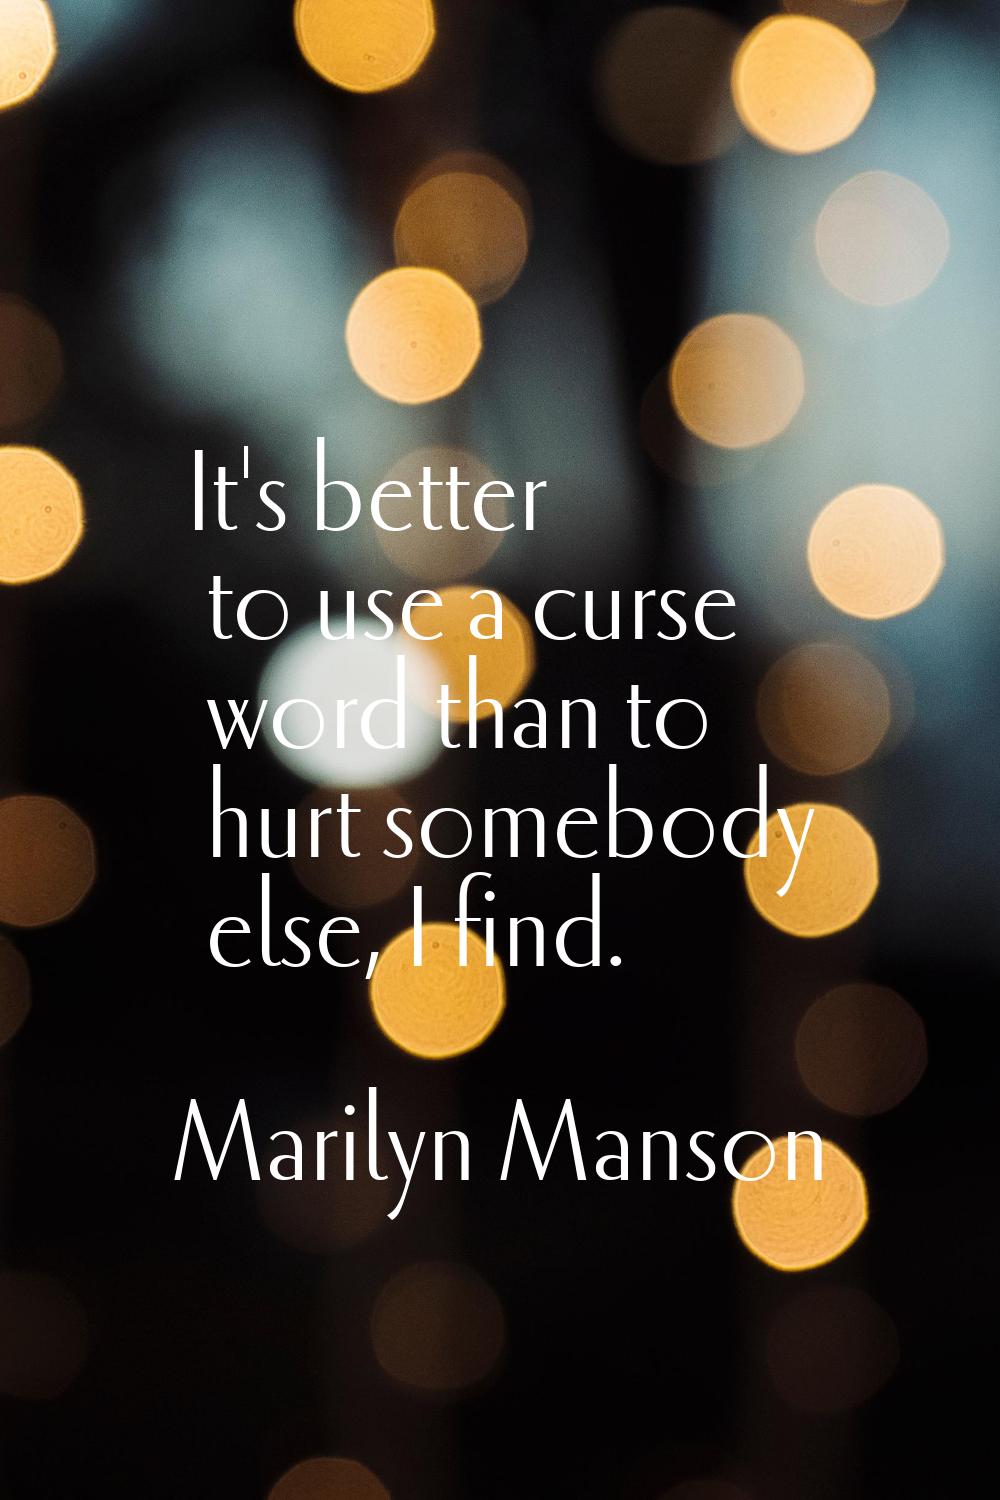 It's better to use a curse word than to hurt somebody else, I find.